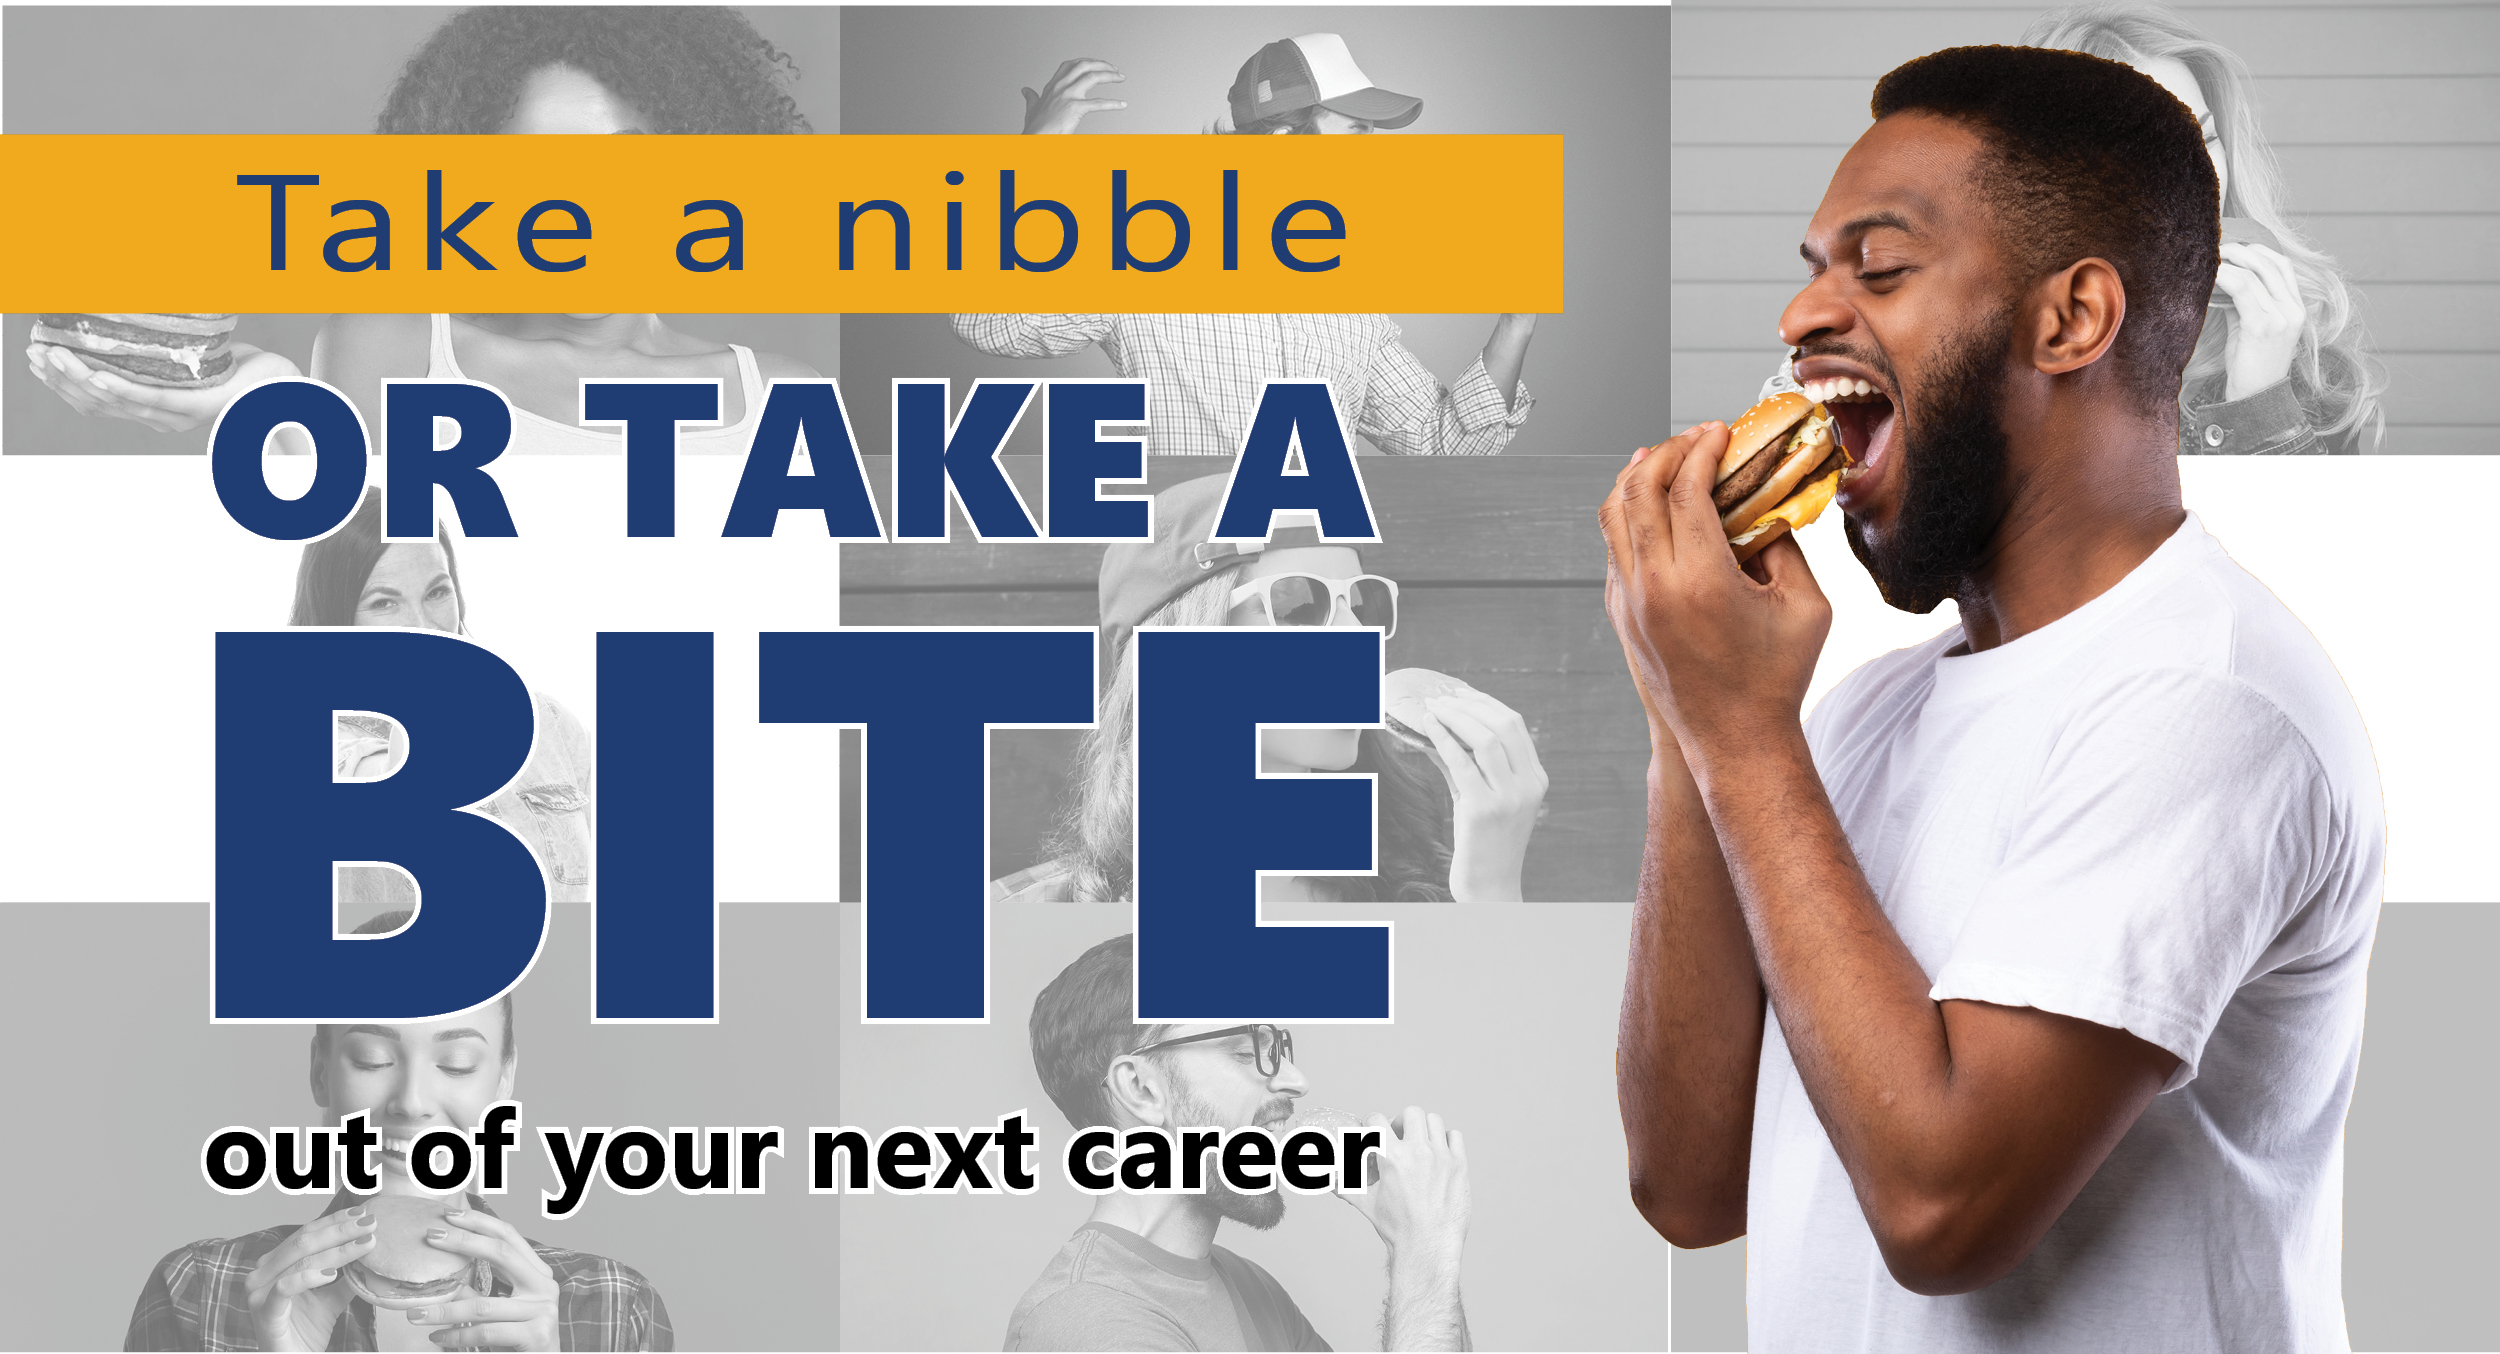 Nibble_or_bite_background